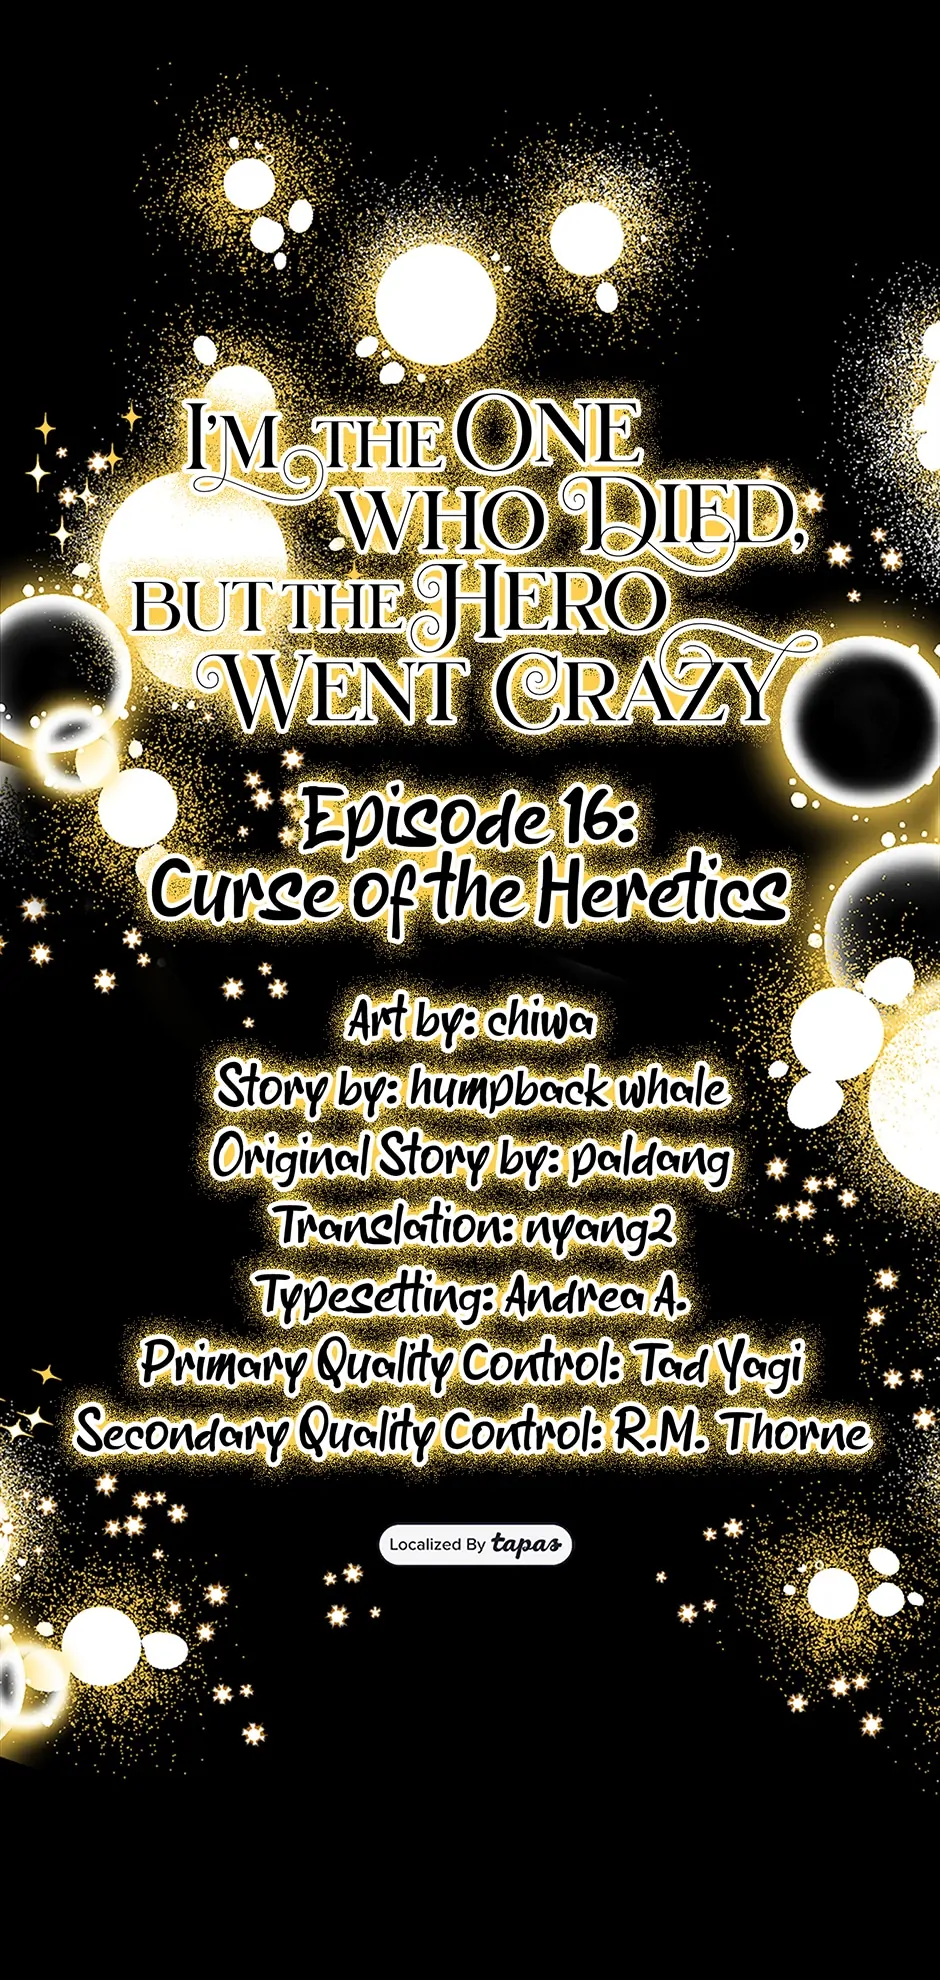 The Hero Went Crazy Even Though I’m the One Who Died chapter 16